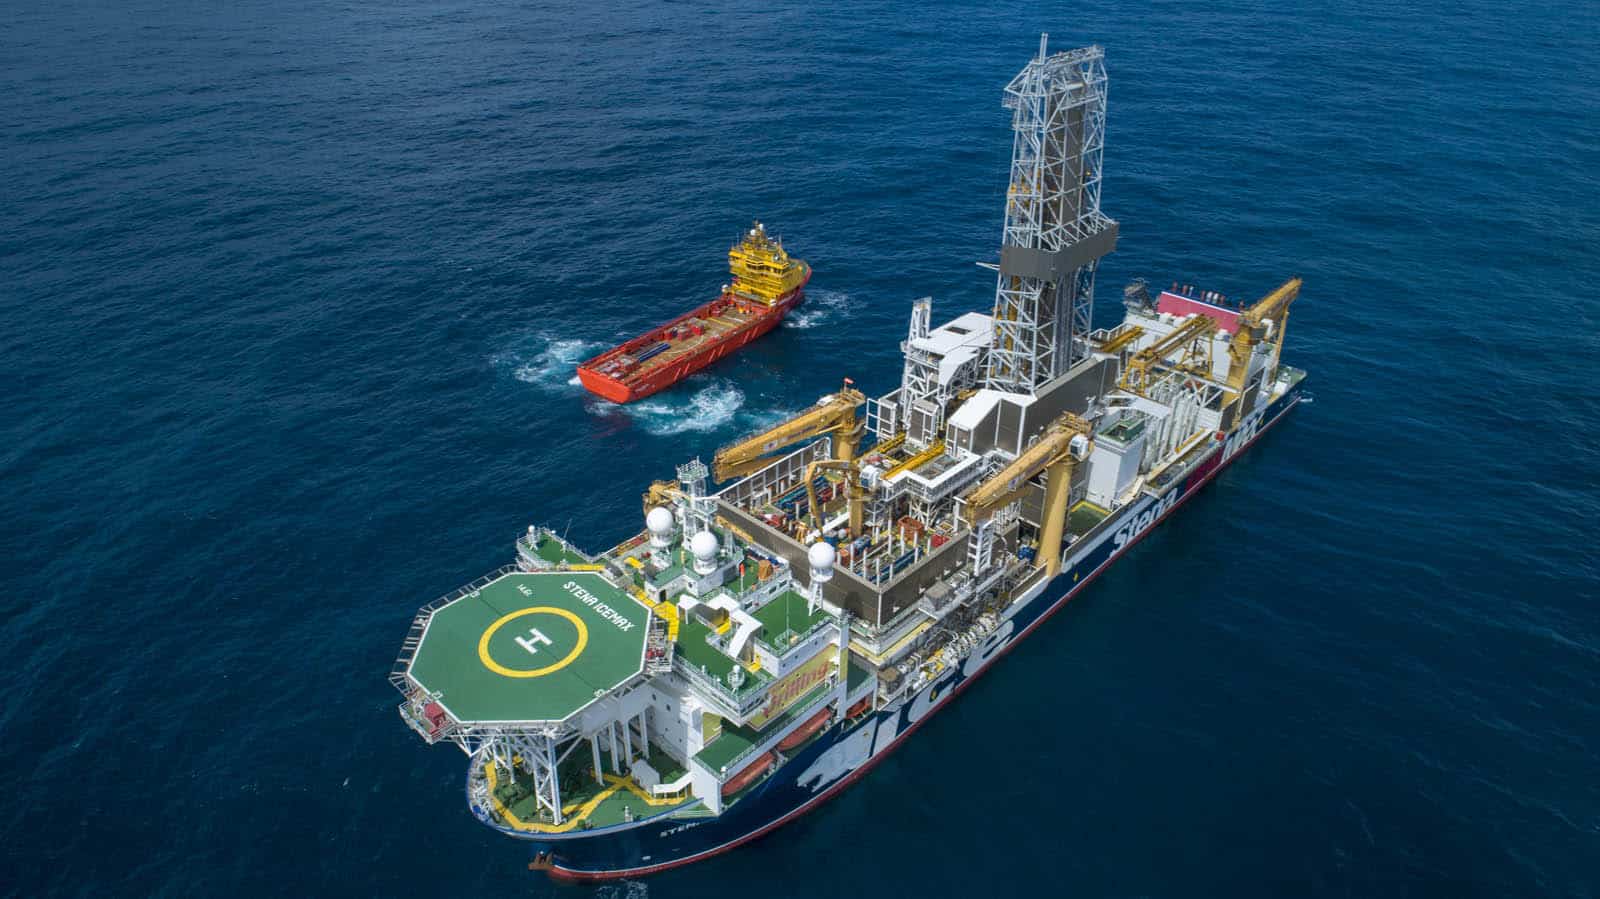 New gas discovery for Energean off Israel